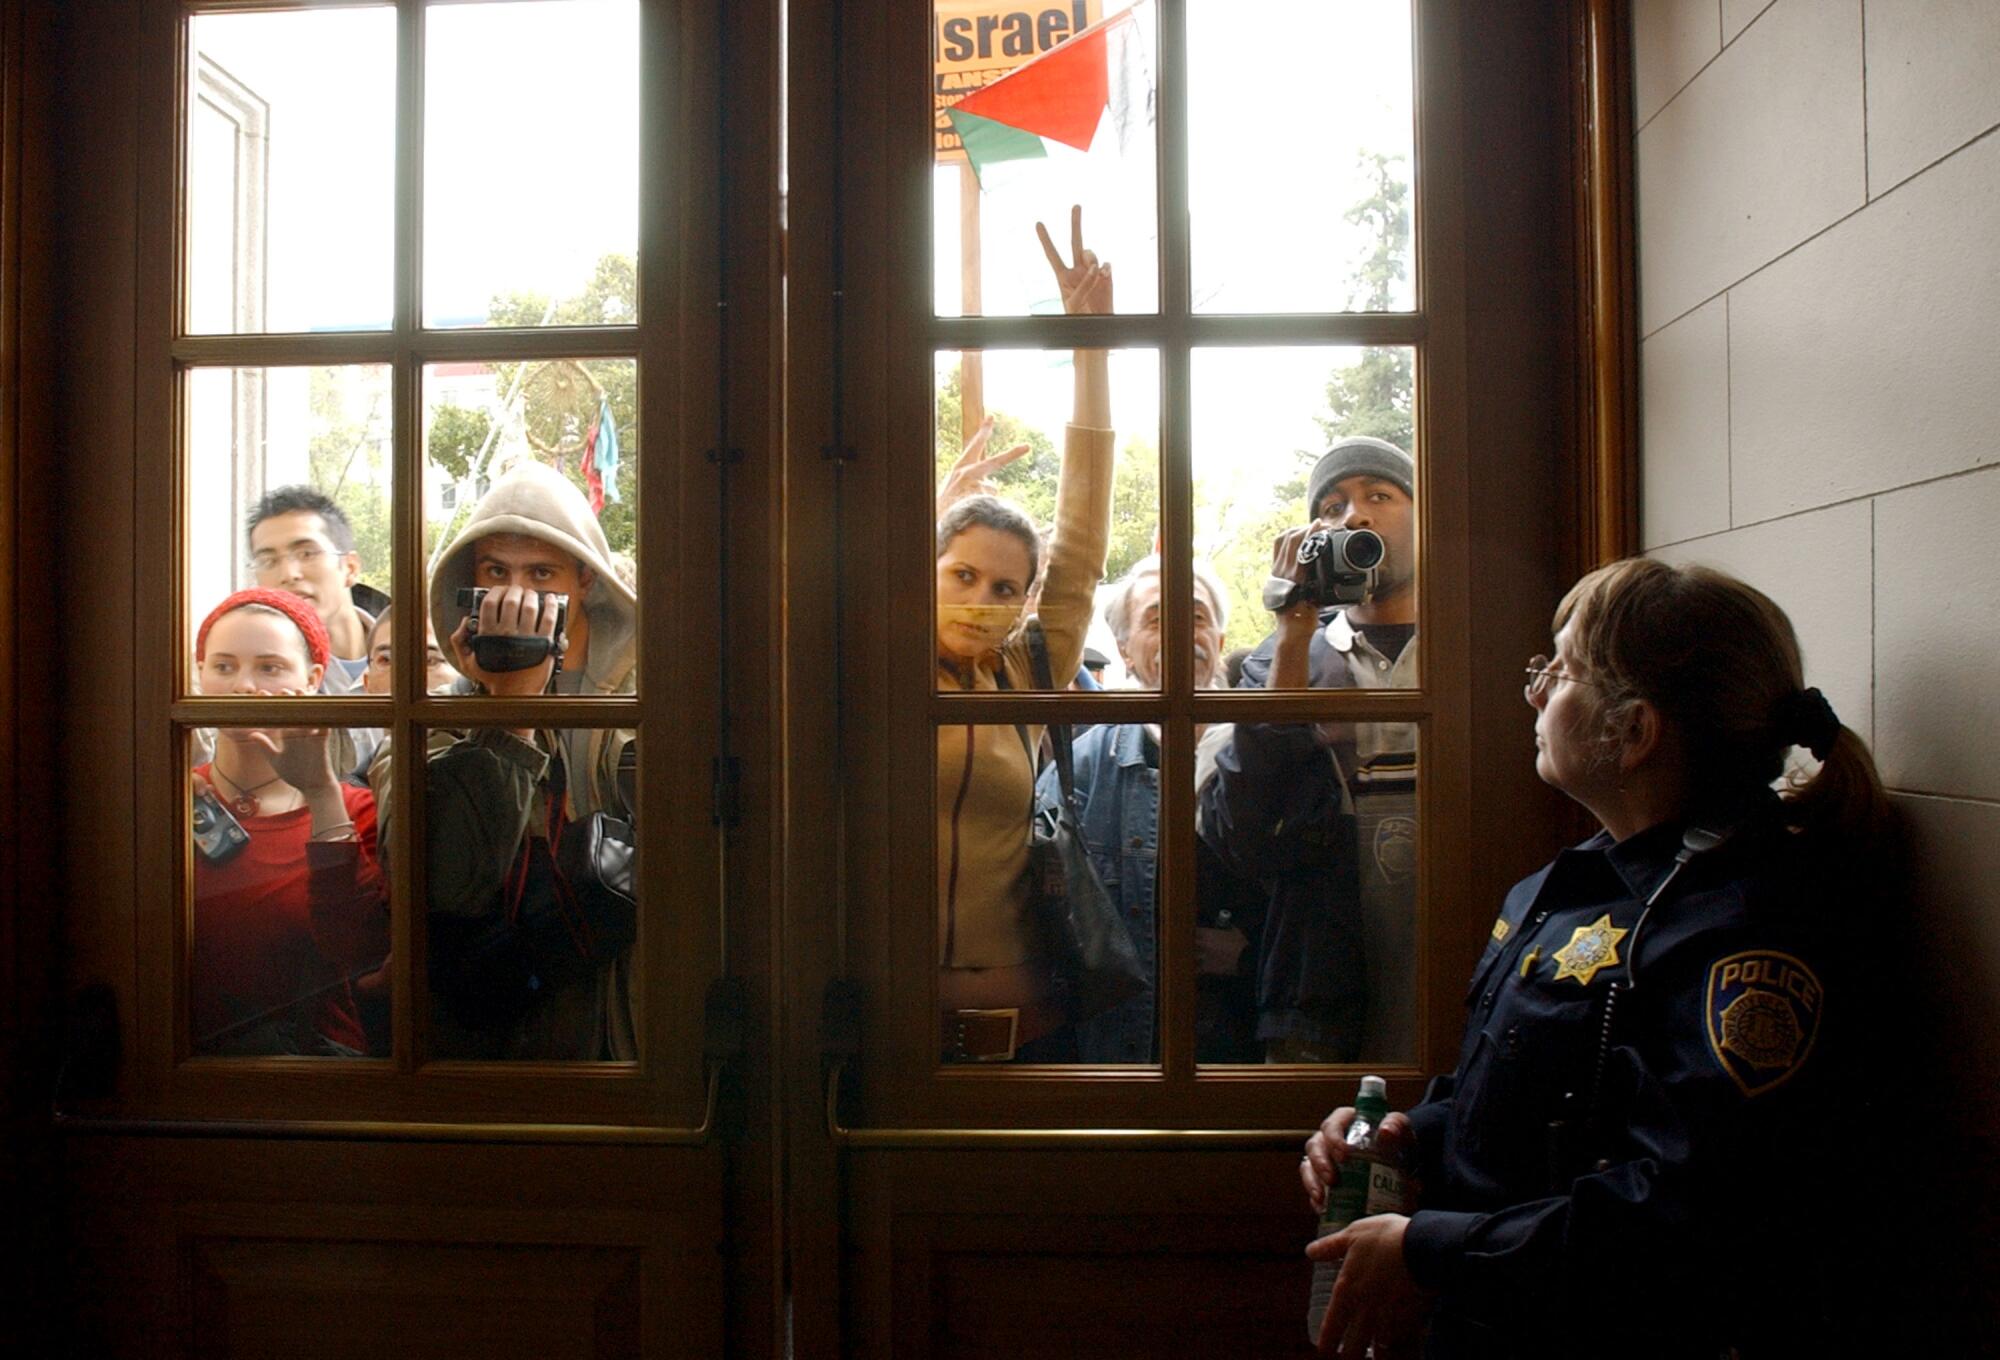 A group of protesters seen through door windows as a policewoman looks out